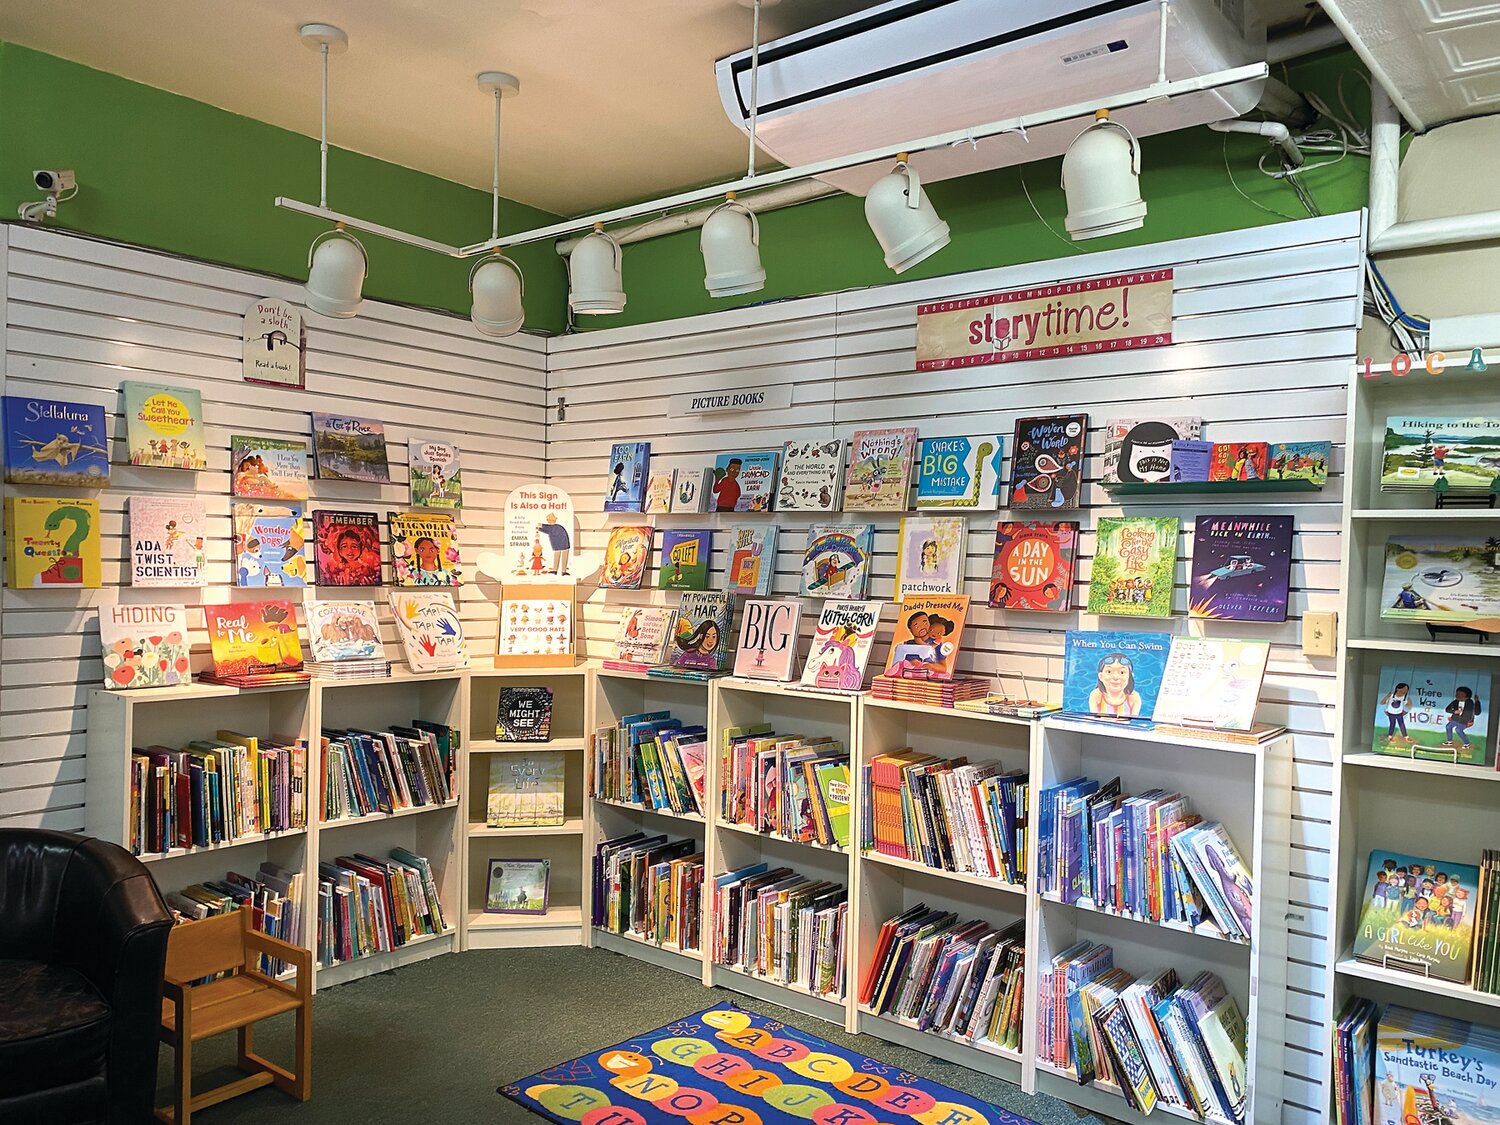 The Doylestown Bookshop welcomes children and their families to browse a wide array of books, puzzles, games and more.